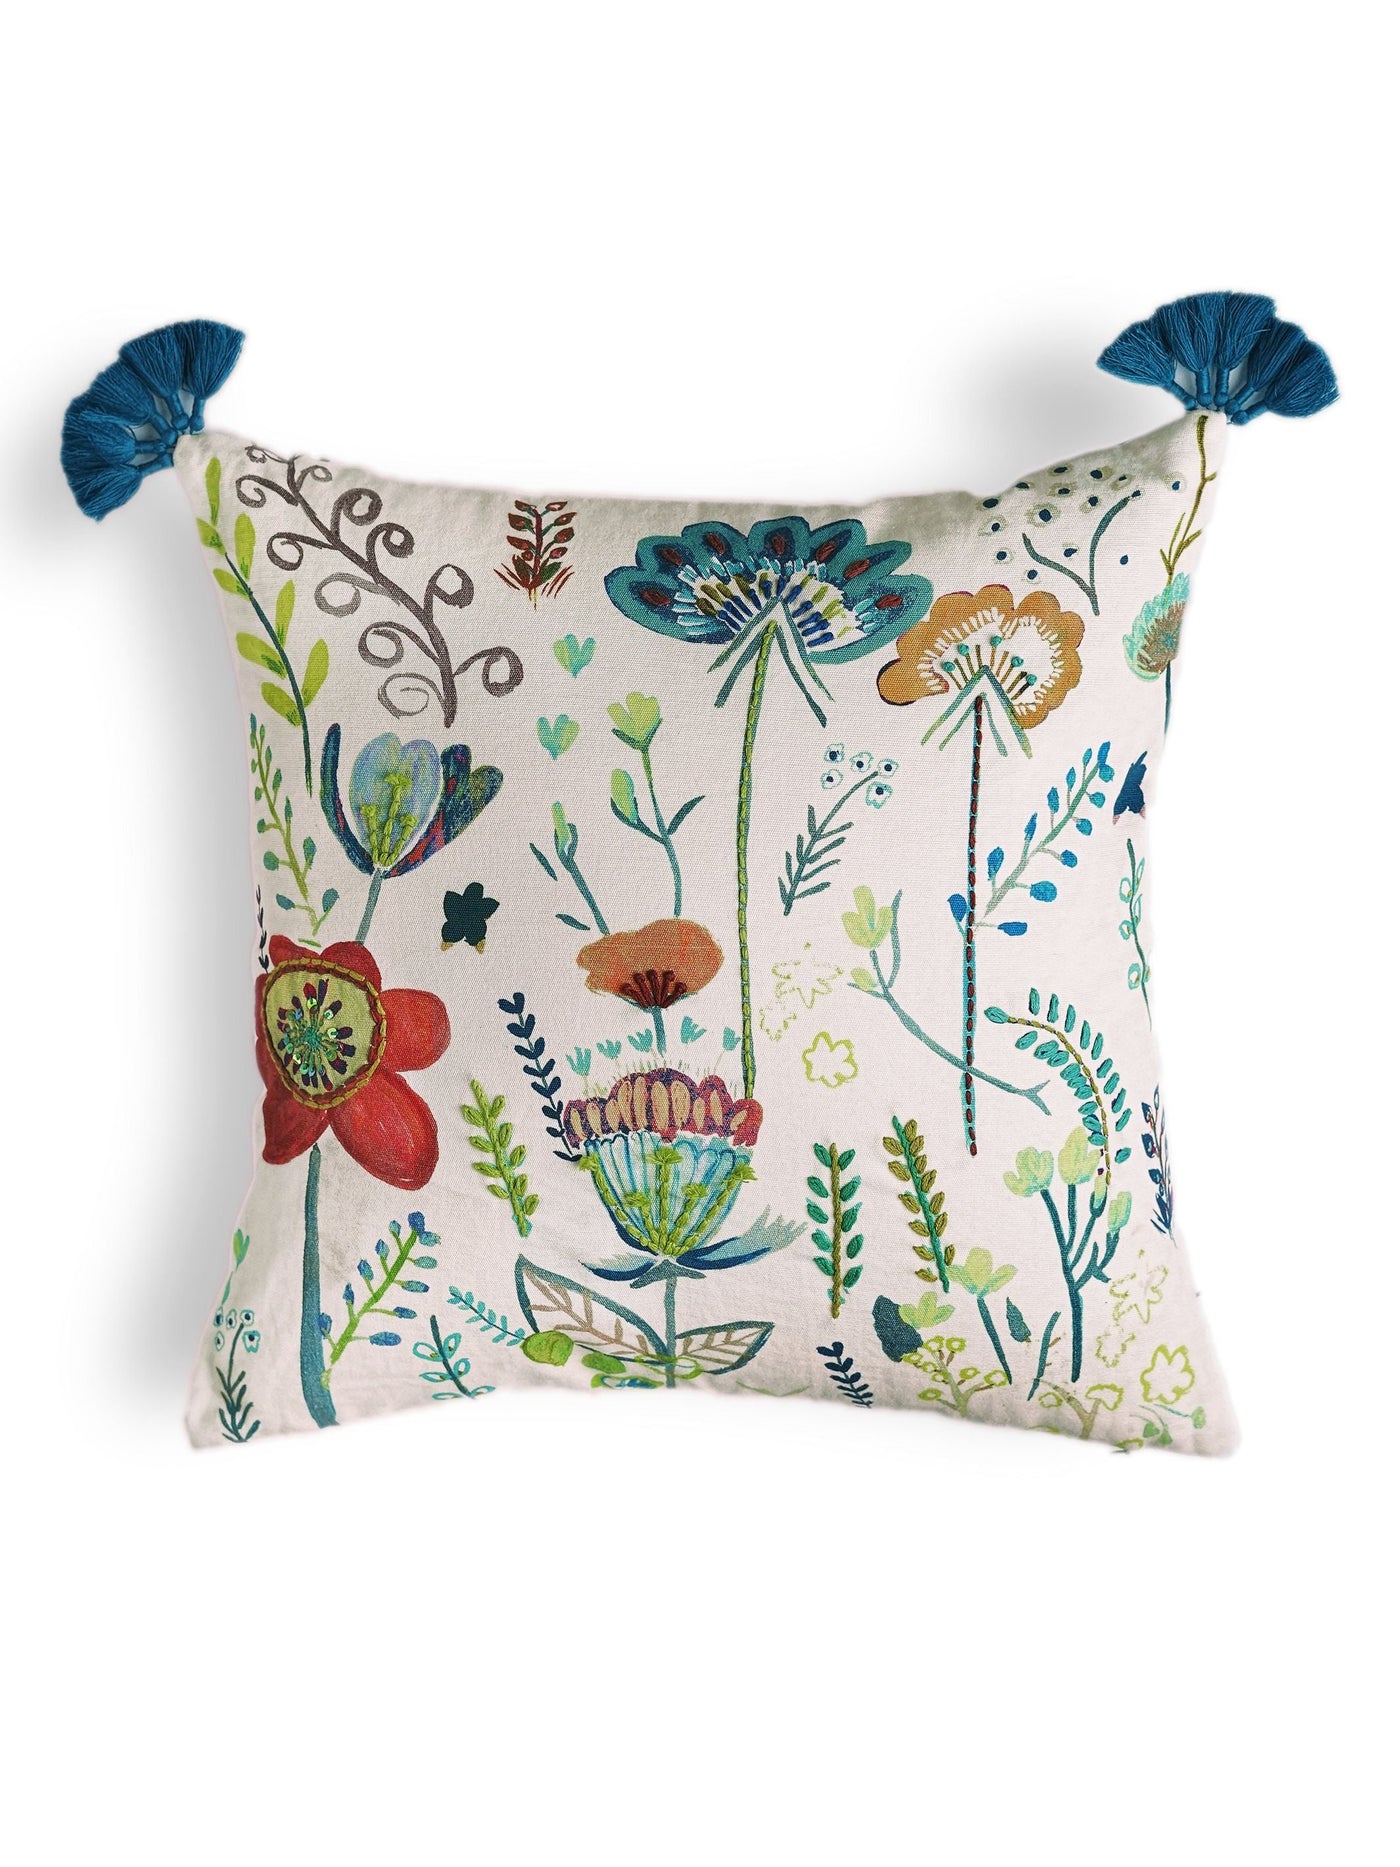 Gardenscape Cushion Cover Turquoise